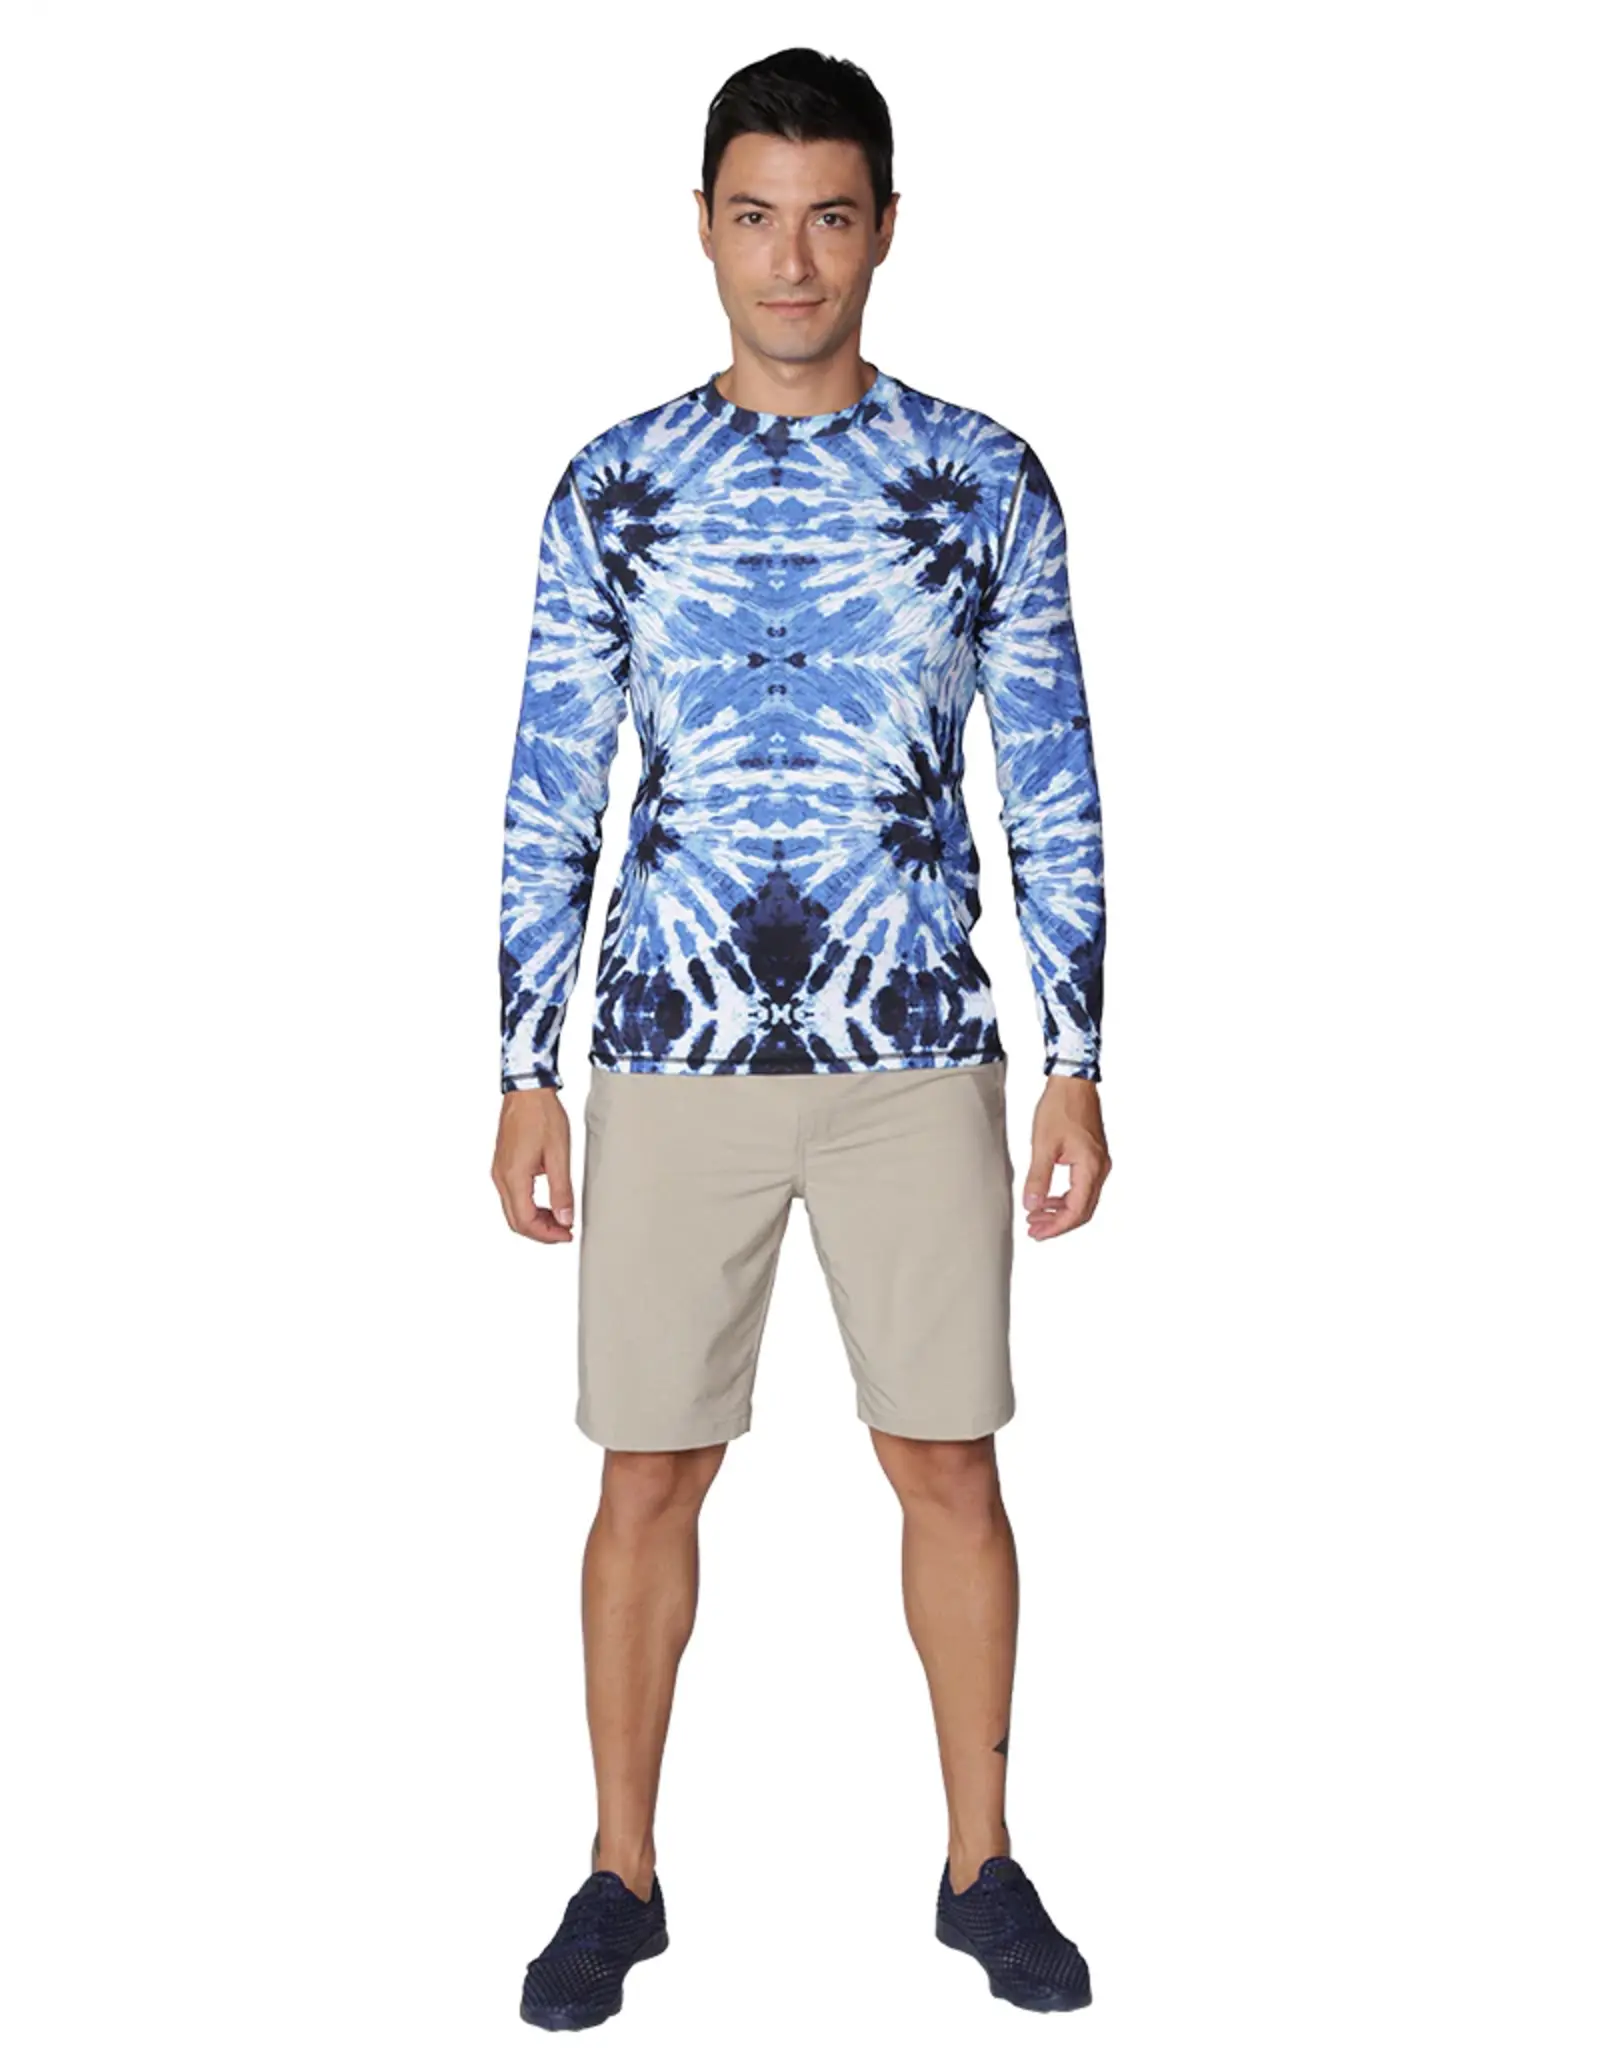 MEN'S PRINTED LS HOODED SUN SHIRT - Smith Army Surplus